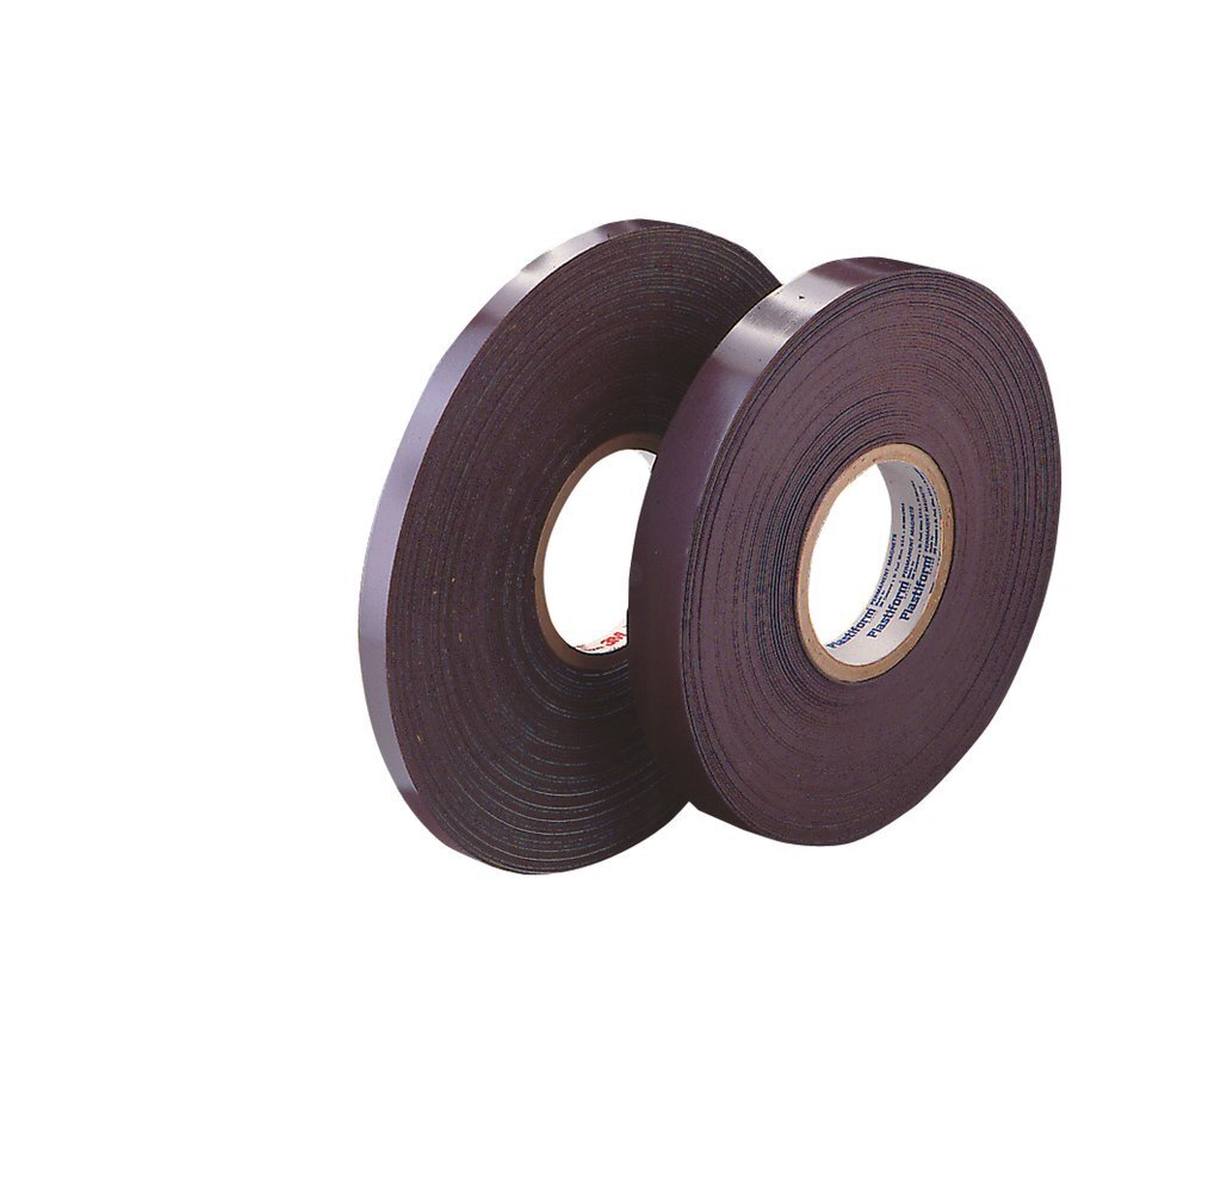 3M 1316 Magnetic adhesive tape, brown, 25 mm x 30.5 m, 0.9 mm